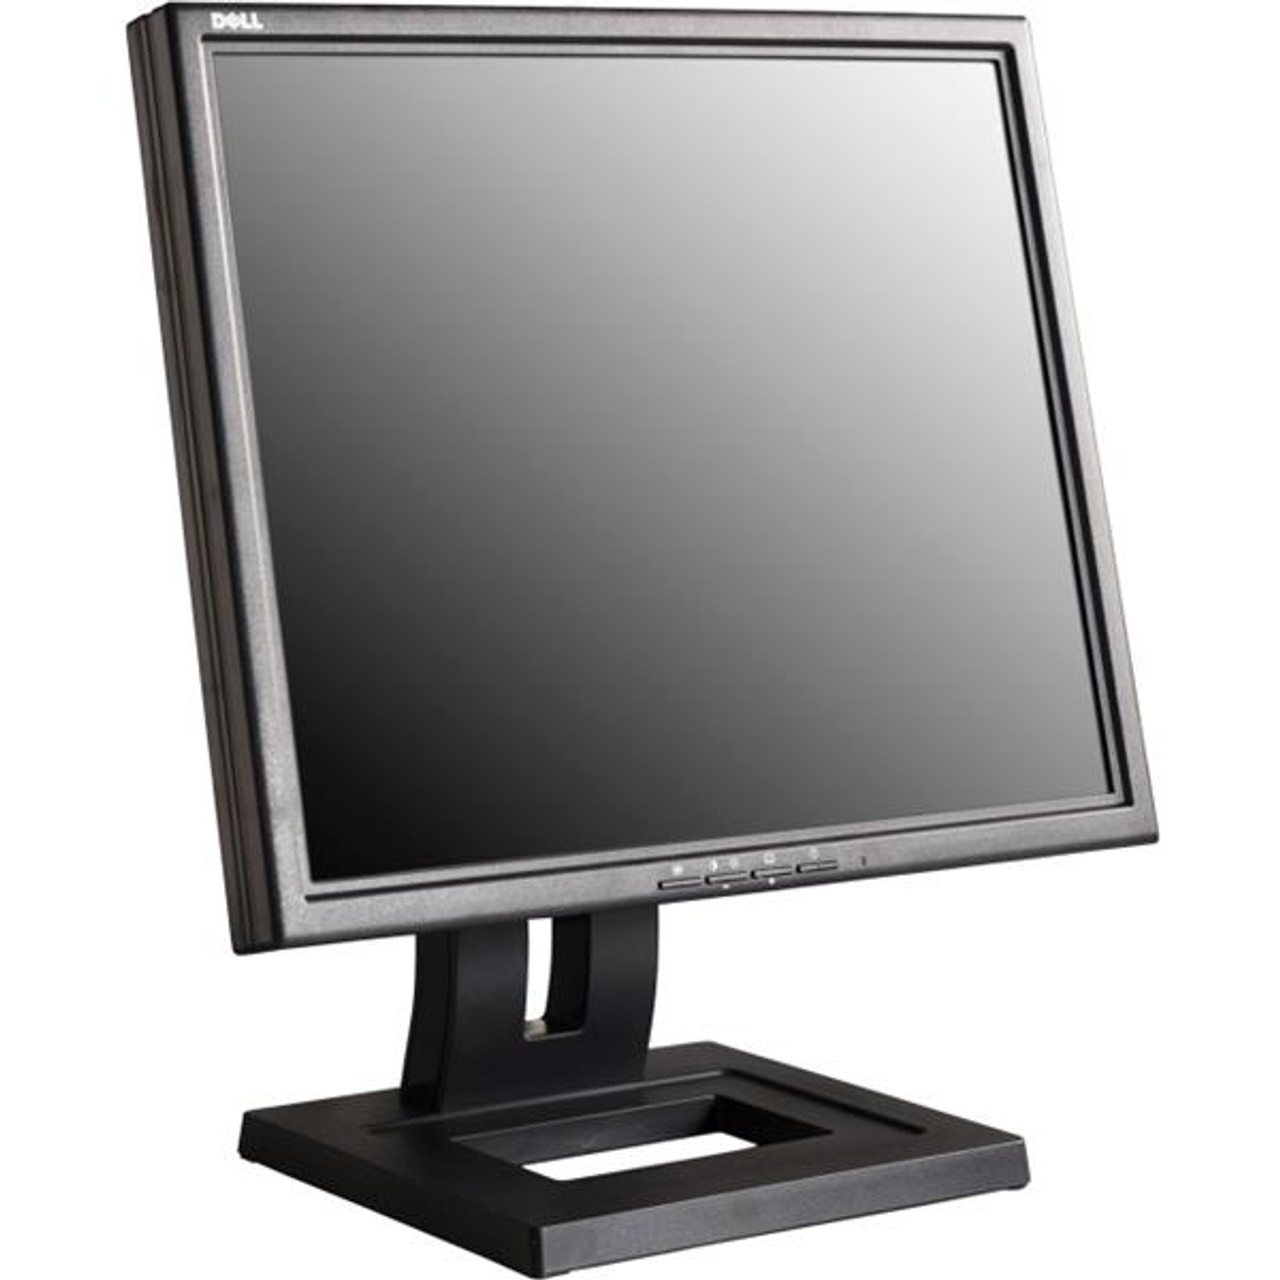 E171FP - Dell 17-Inch Flat Panel TFT LCD Screen (Refurbished)